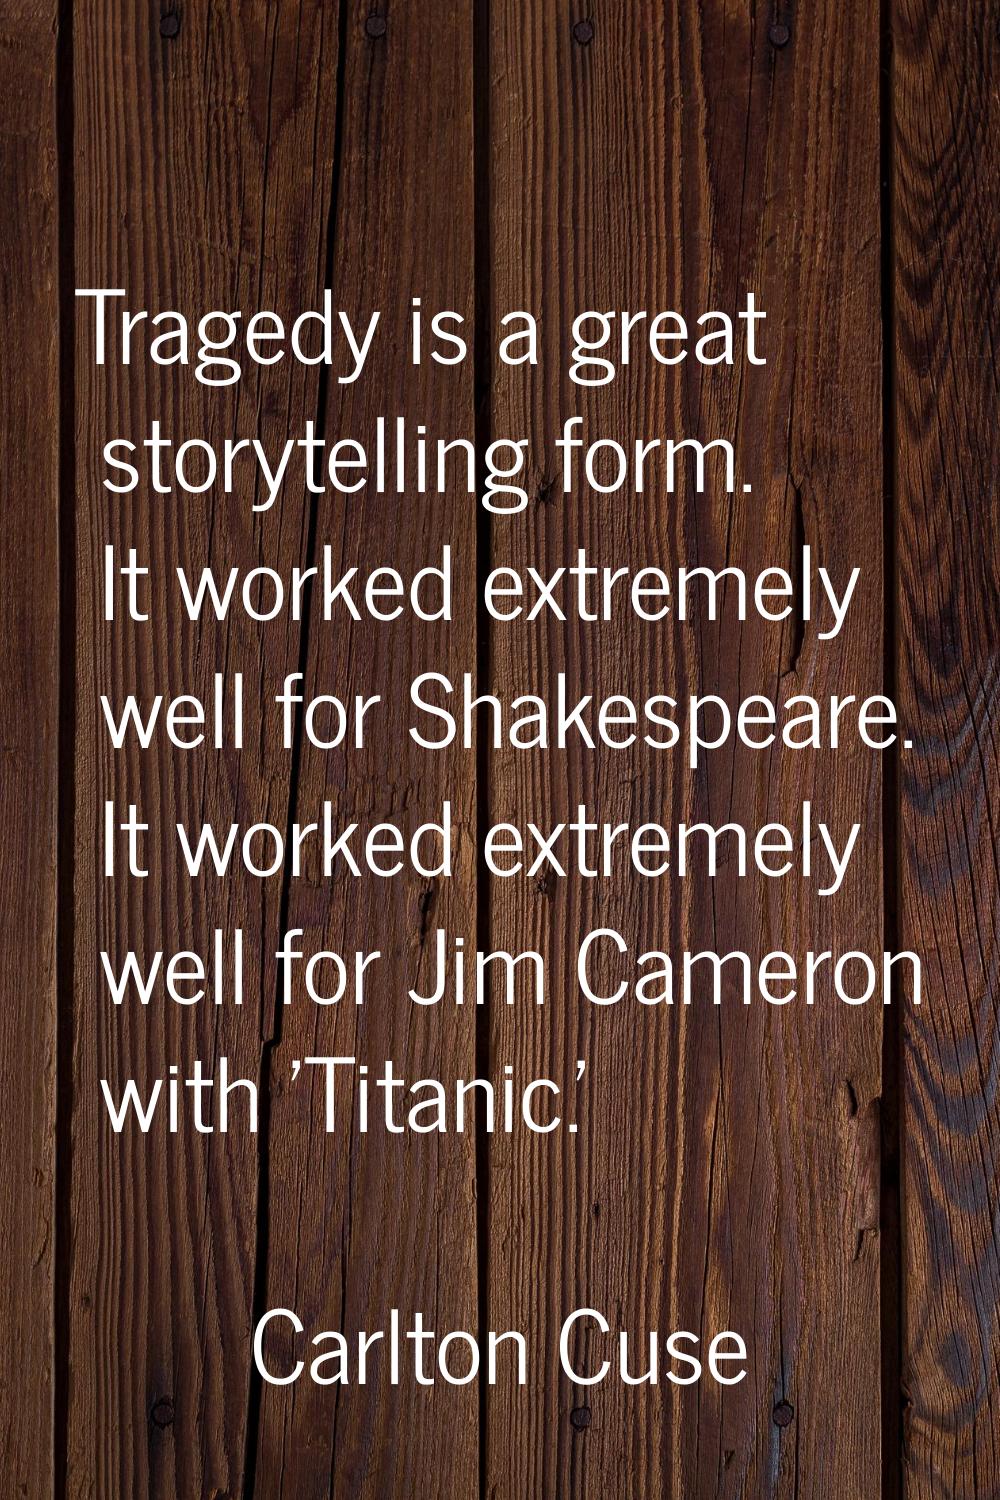 Tragedy is a great storytelling form. It worked extremely well for Shakespeare. It worked extremely